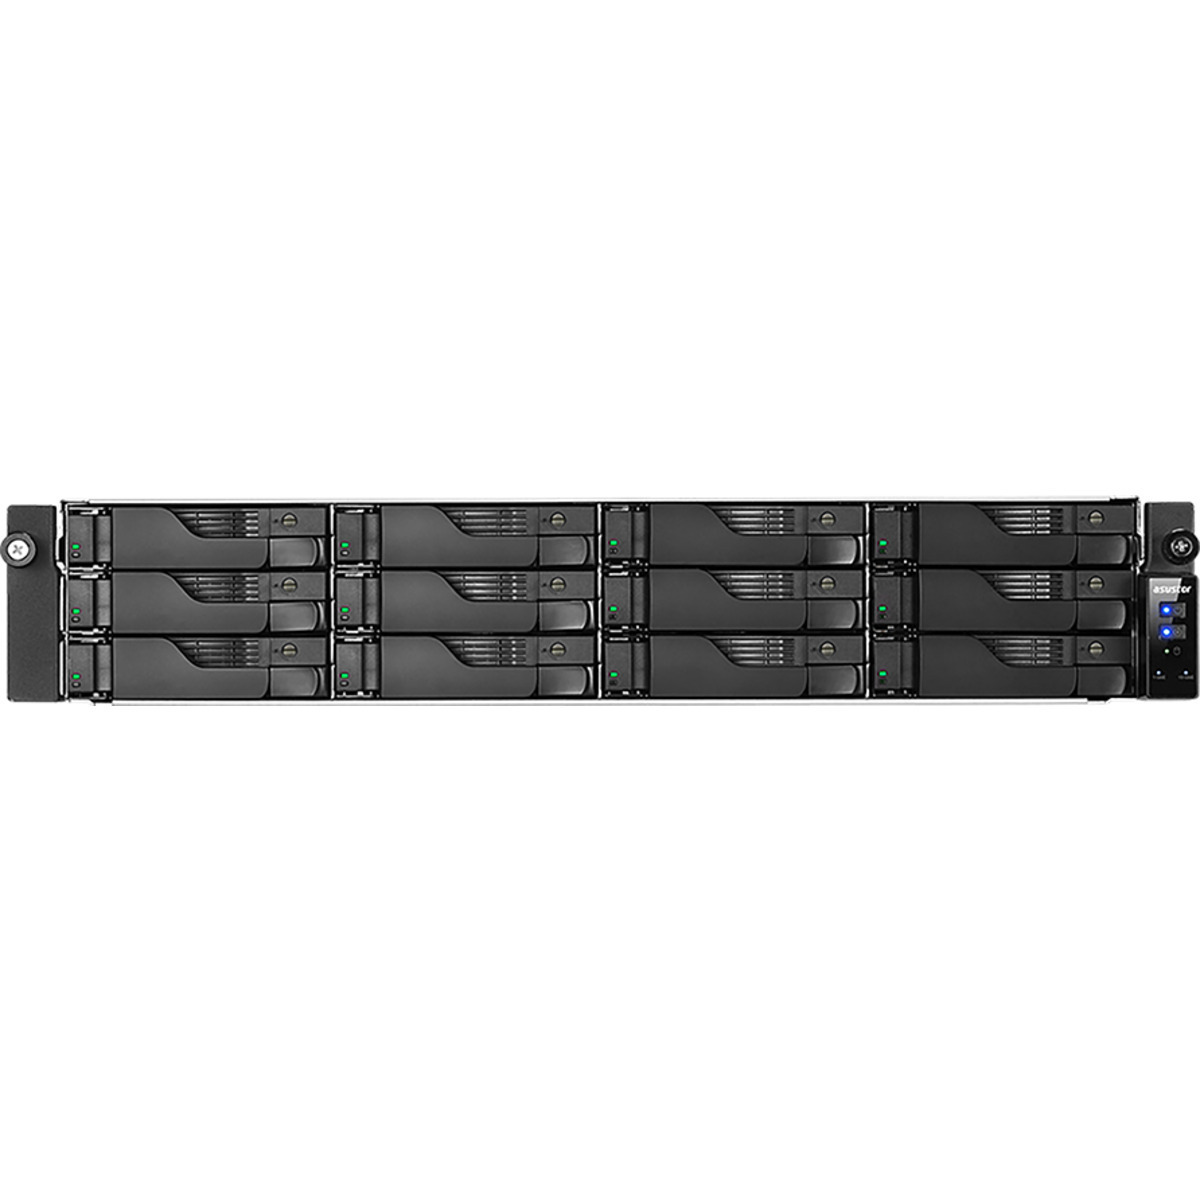 ASUSTOR LOCKERSTOR 12RD AS6512RD 180tb 12-Bay RackMount Multimedia / Power User / Business NAS - Network Attached Storage Device 9x20tb Seagate IronWolf Pro ST20000NT001 3.5 7200rpm SATA 6Gb/s HDD NAS Class Drives Installed - Burn-In Tested - FREE RAM UPGRADE LOCKERSTOR 12RD AS6512RD